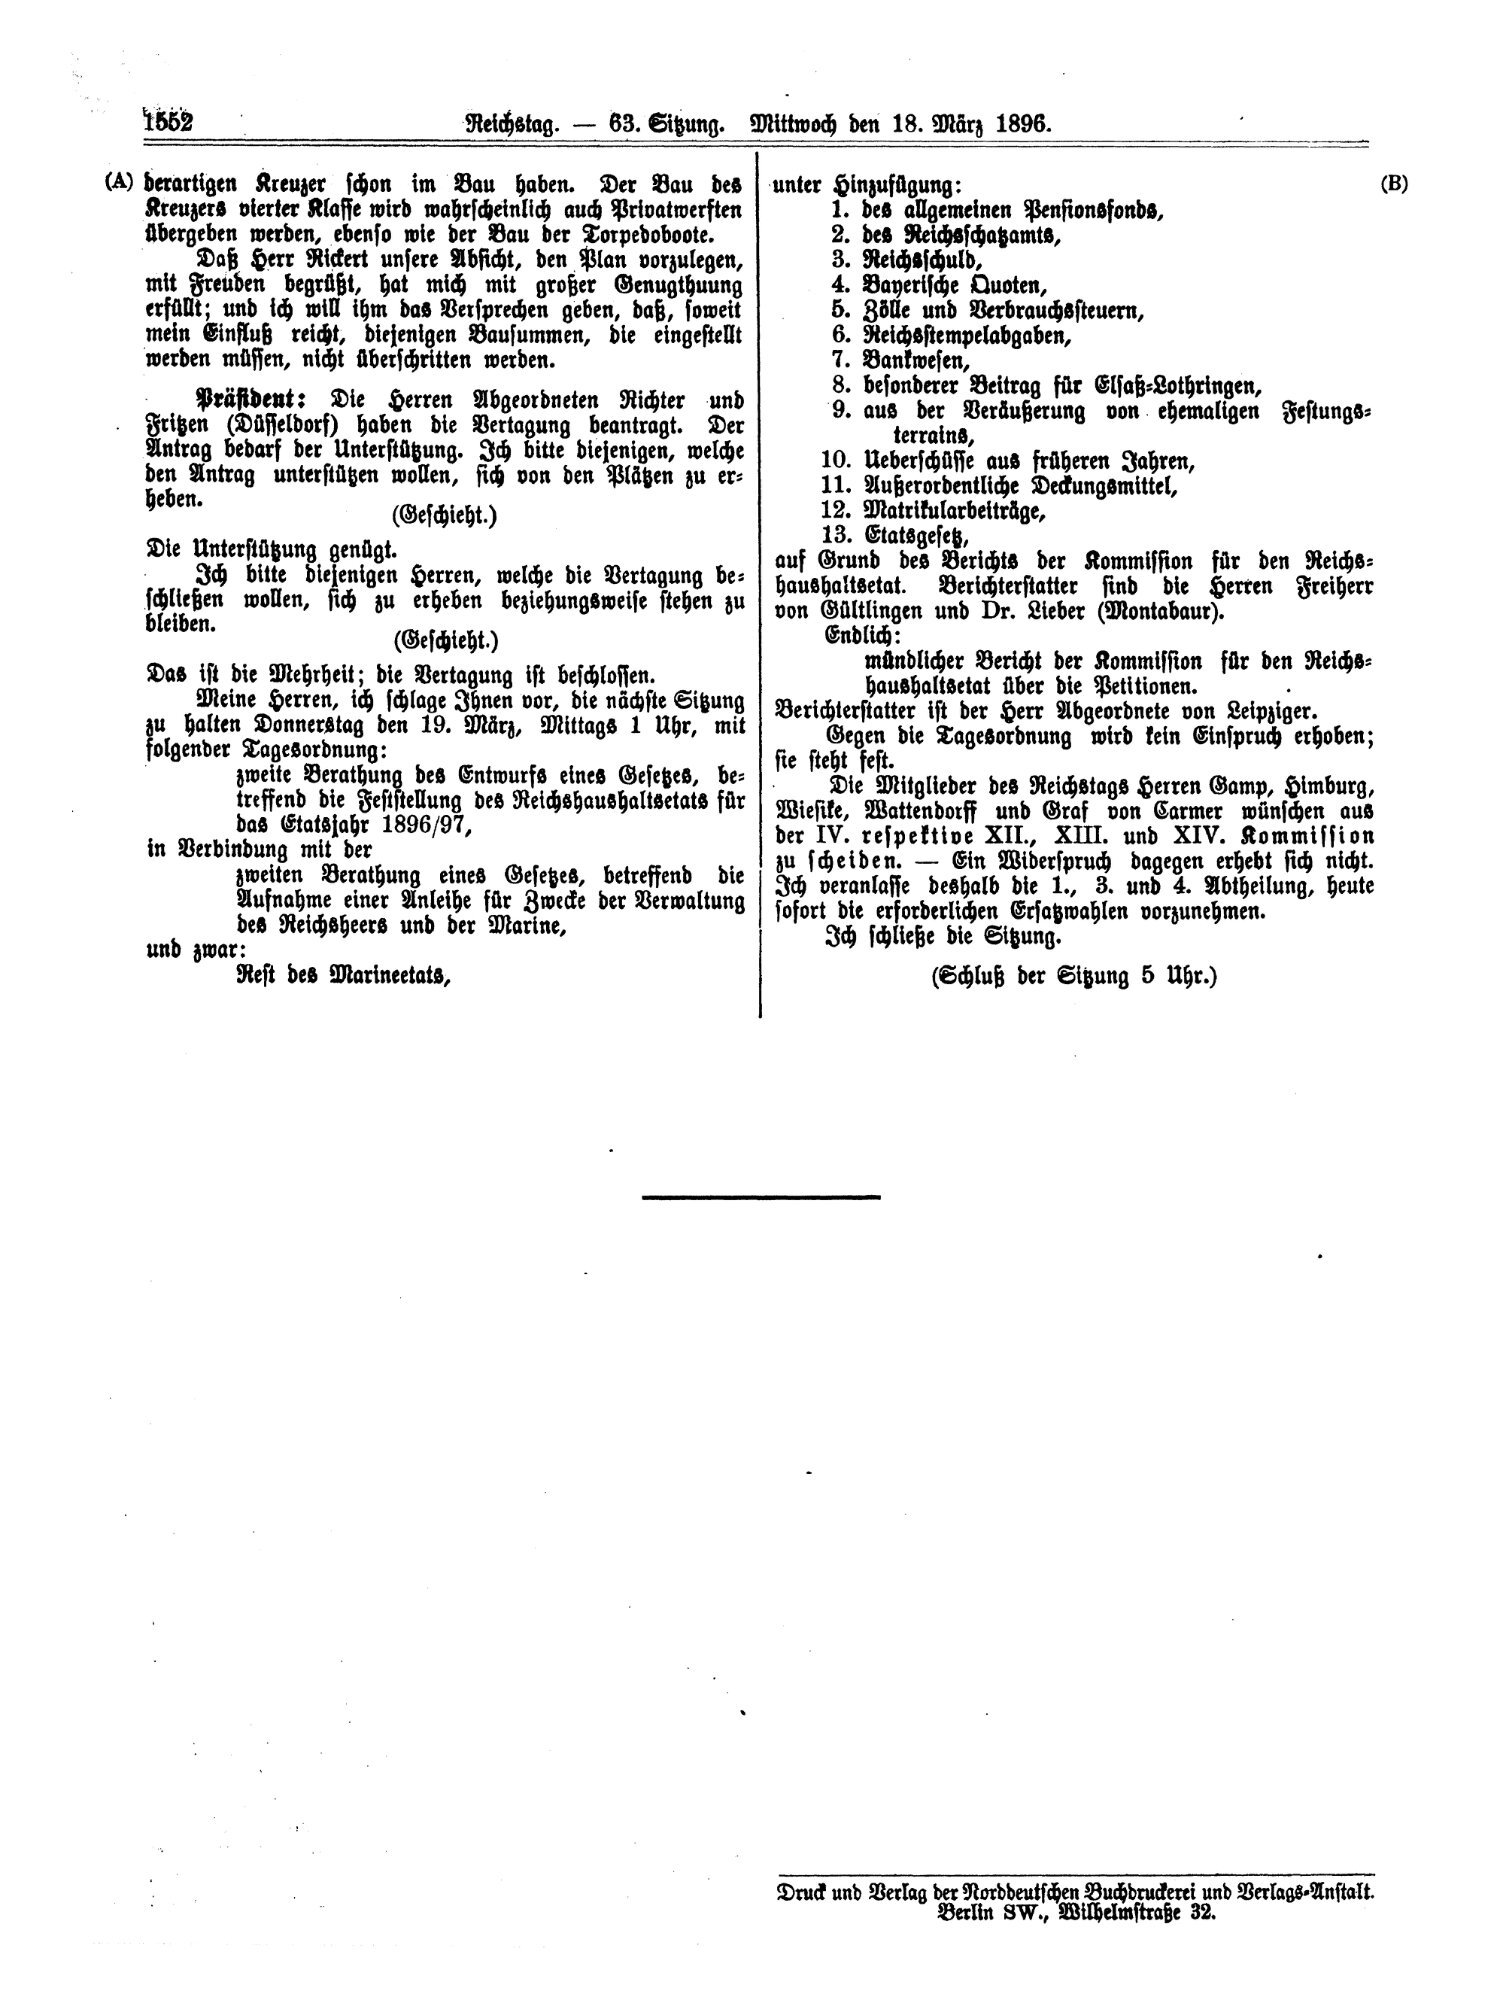 Scan of page 1552